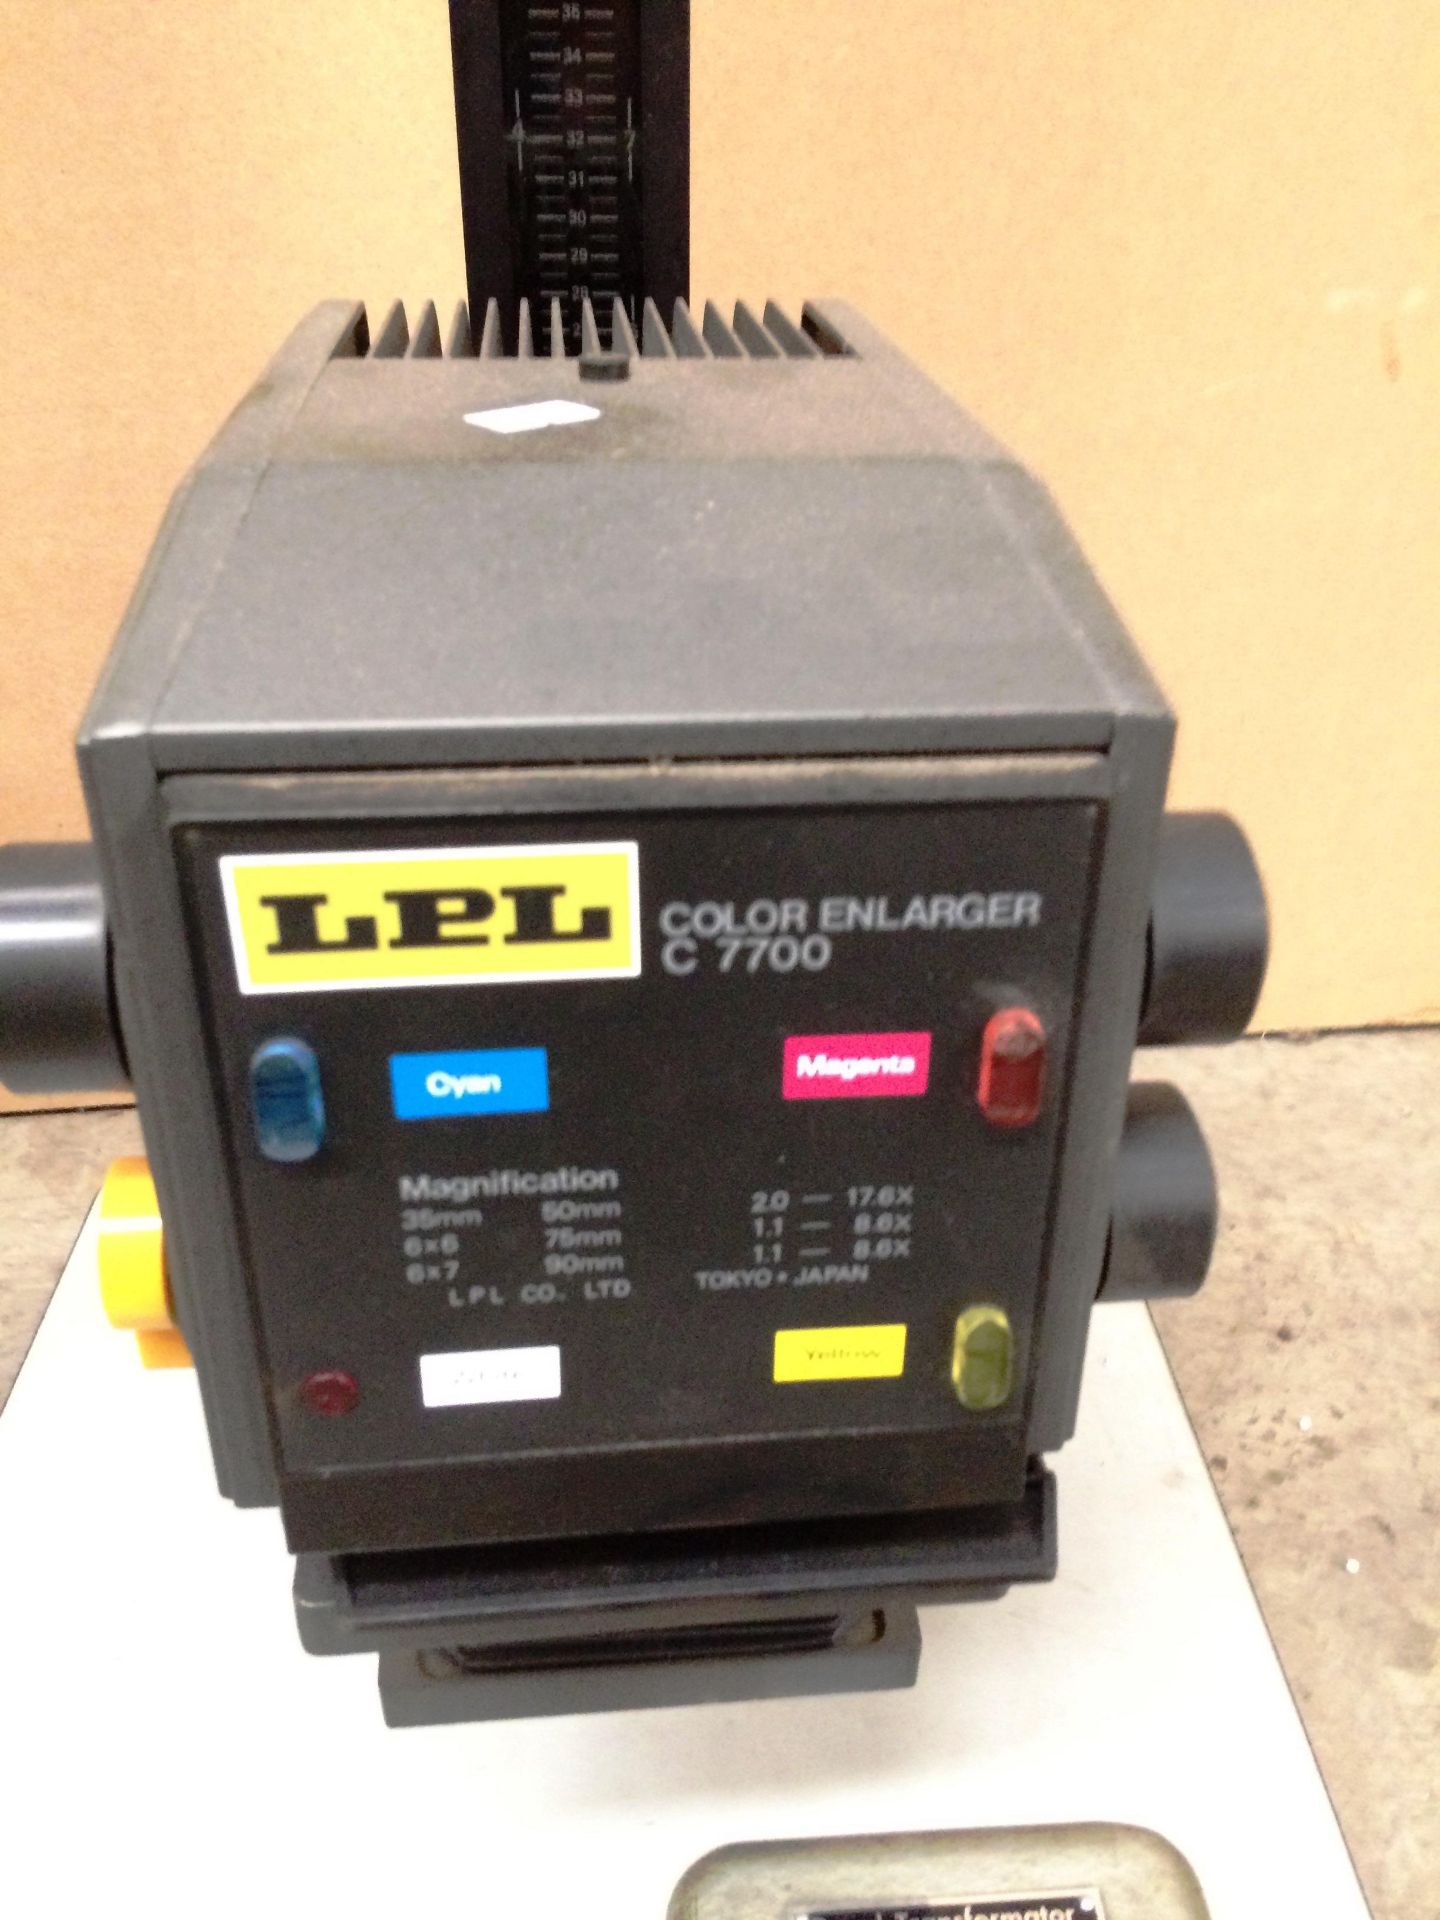 LPL C7700 colour enlarger on stand - Image 2 of 3